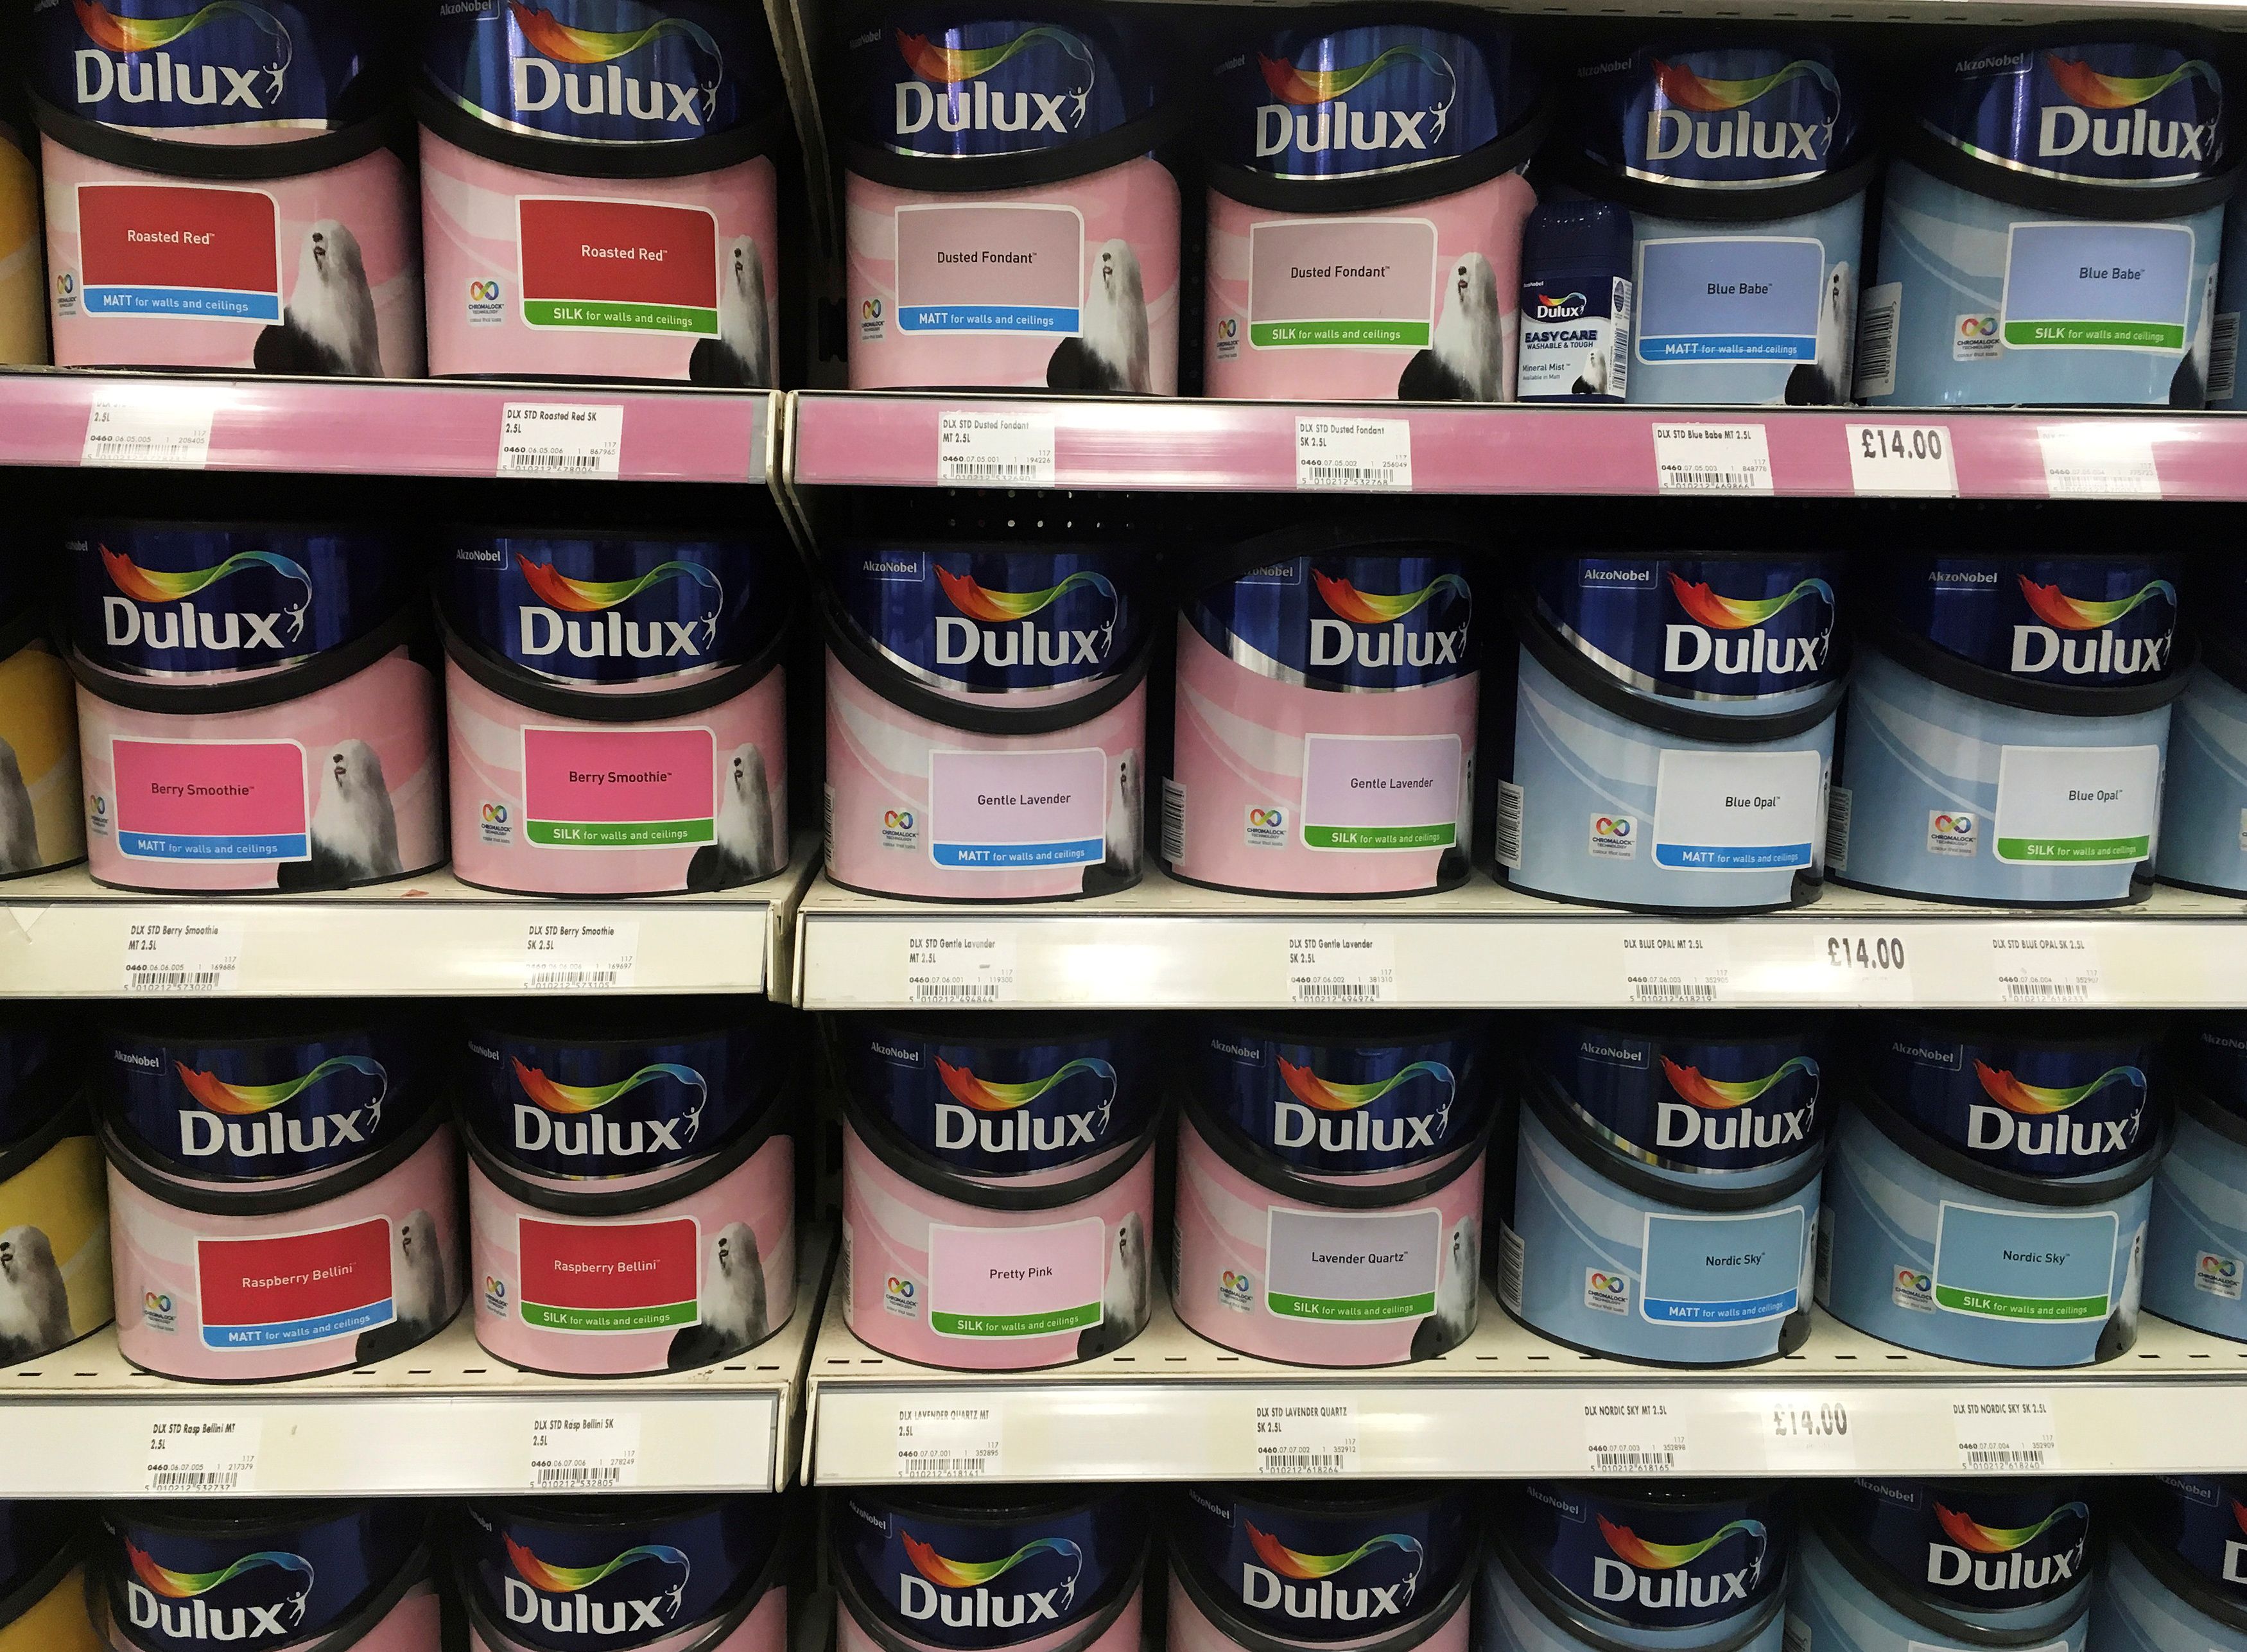 Cans of Dulux paint, an Akzo Nobel brand, are seen on the shelves of a hardware store near Manchester, Britain.